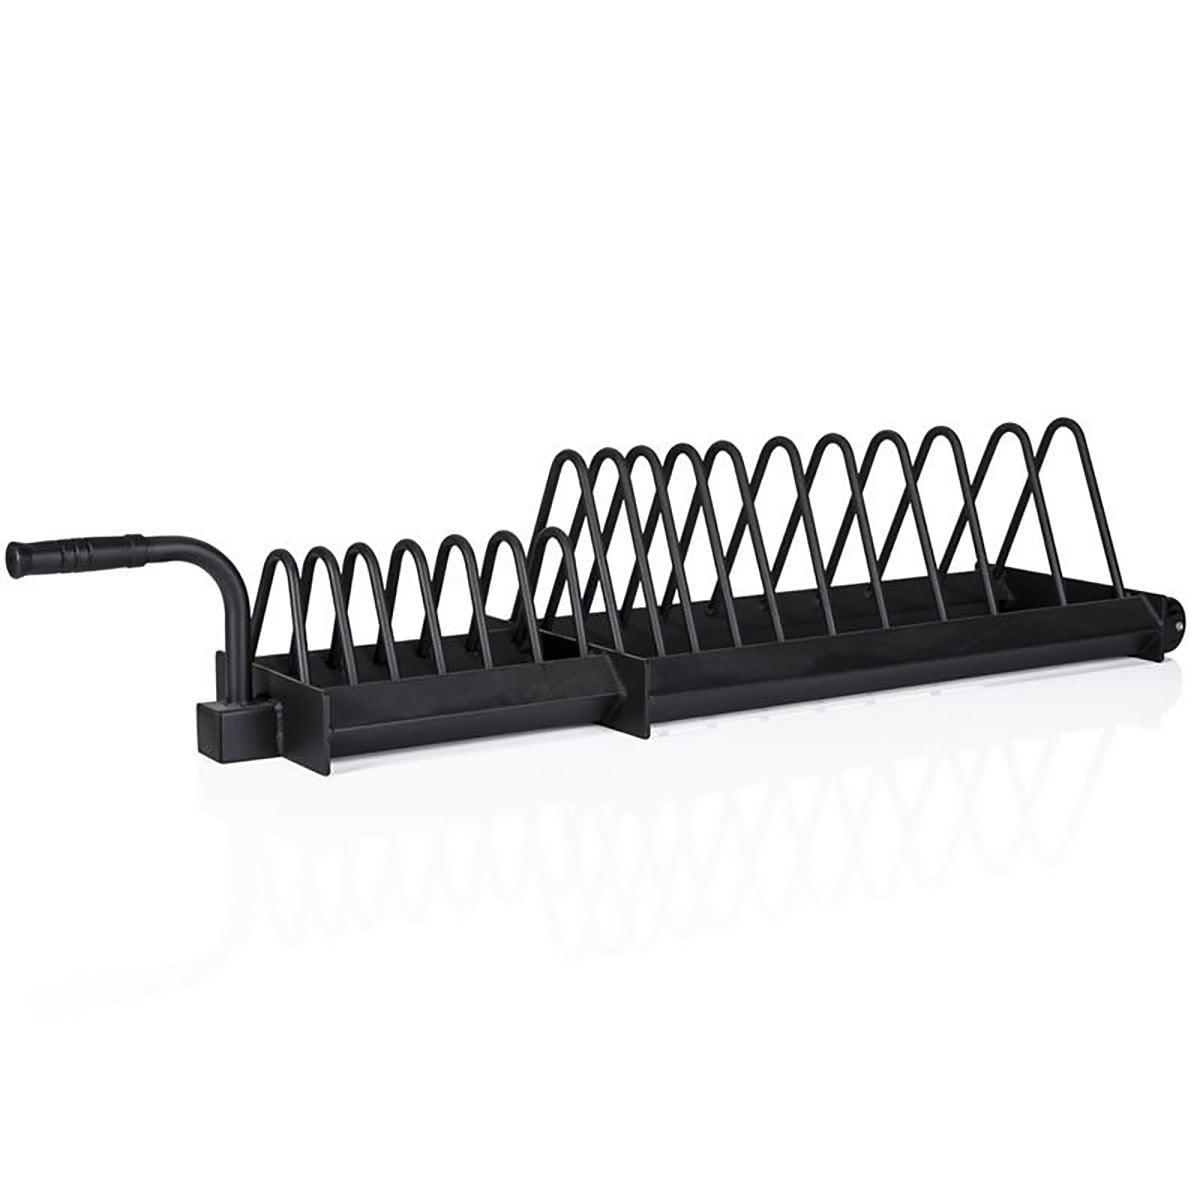 Gymstick Pro Comb Stand